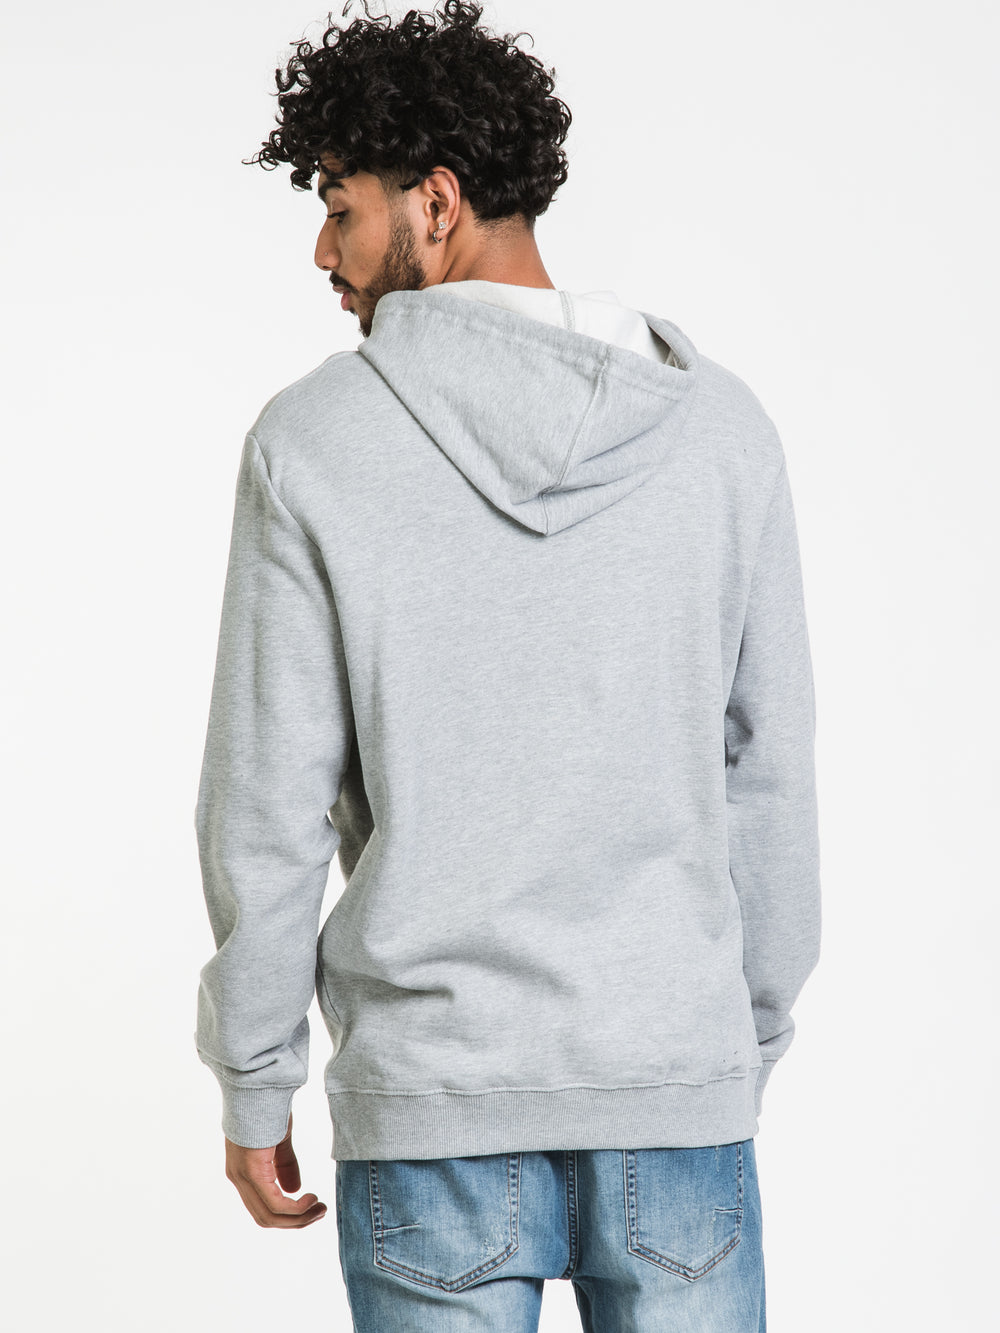 DC SHOES DC STAR HOODIE - CLEARANCE